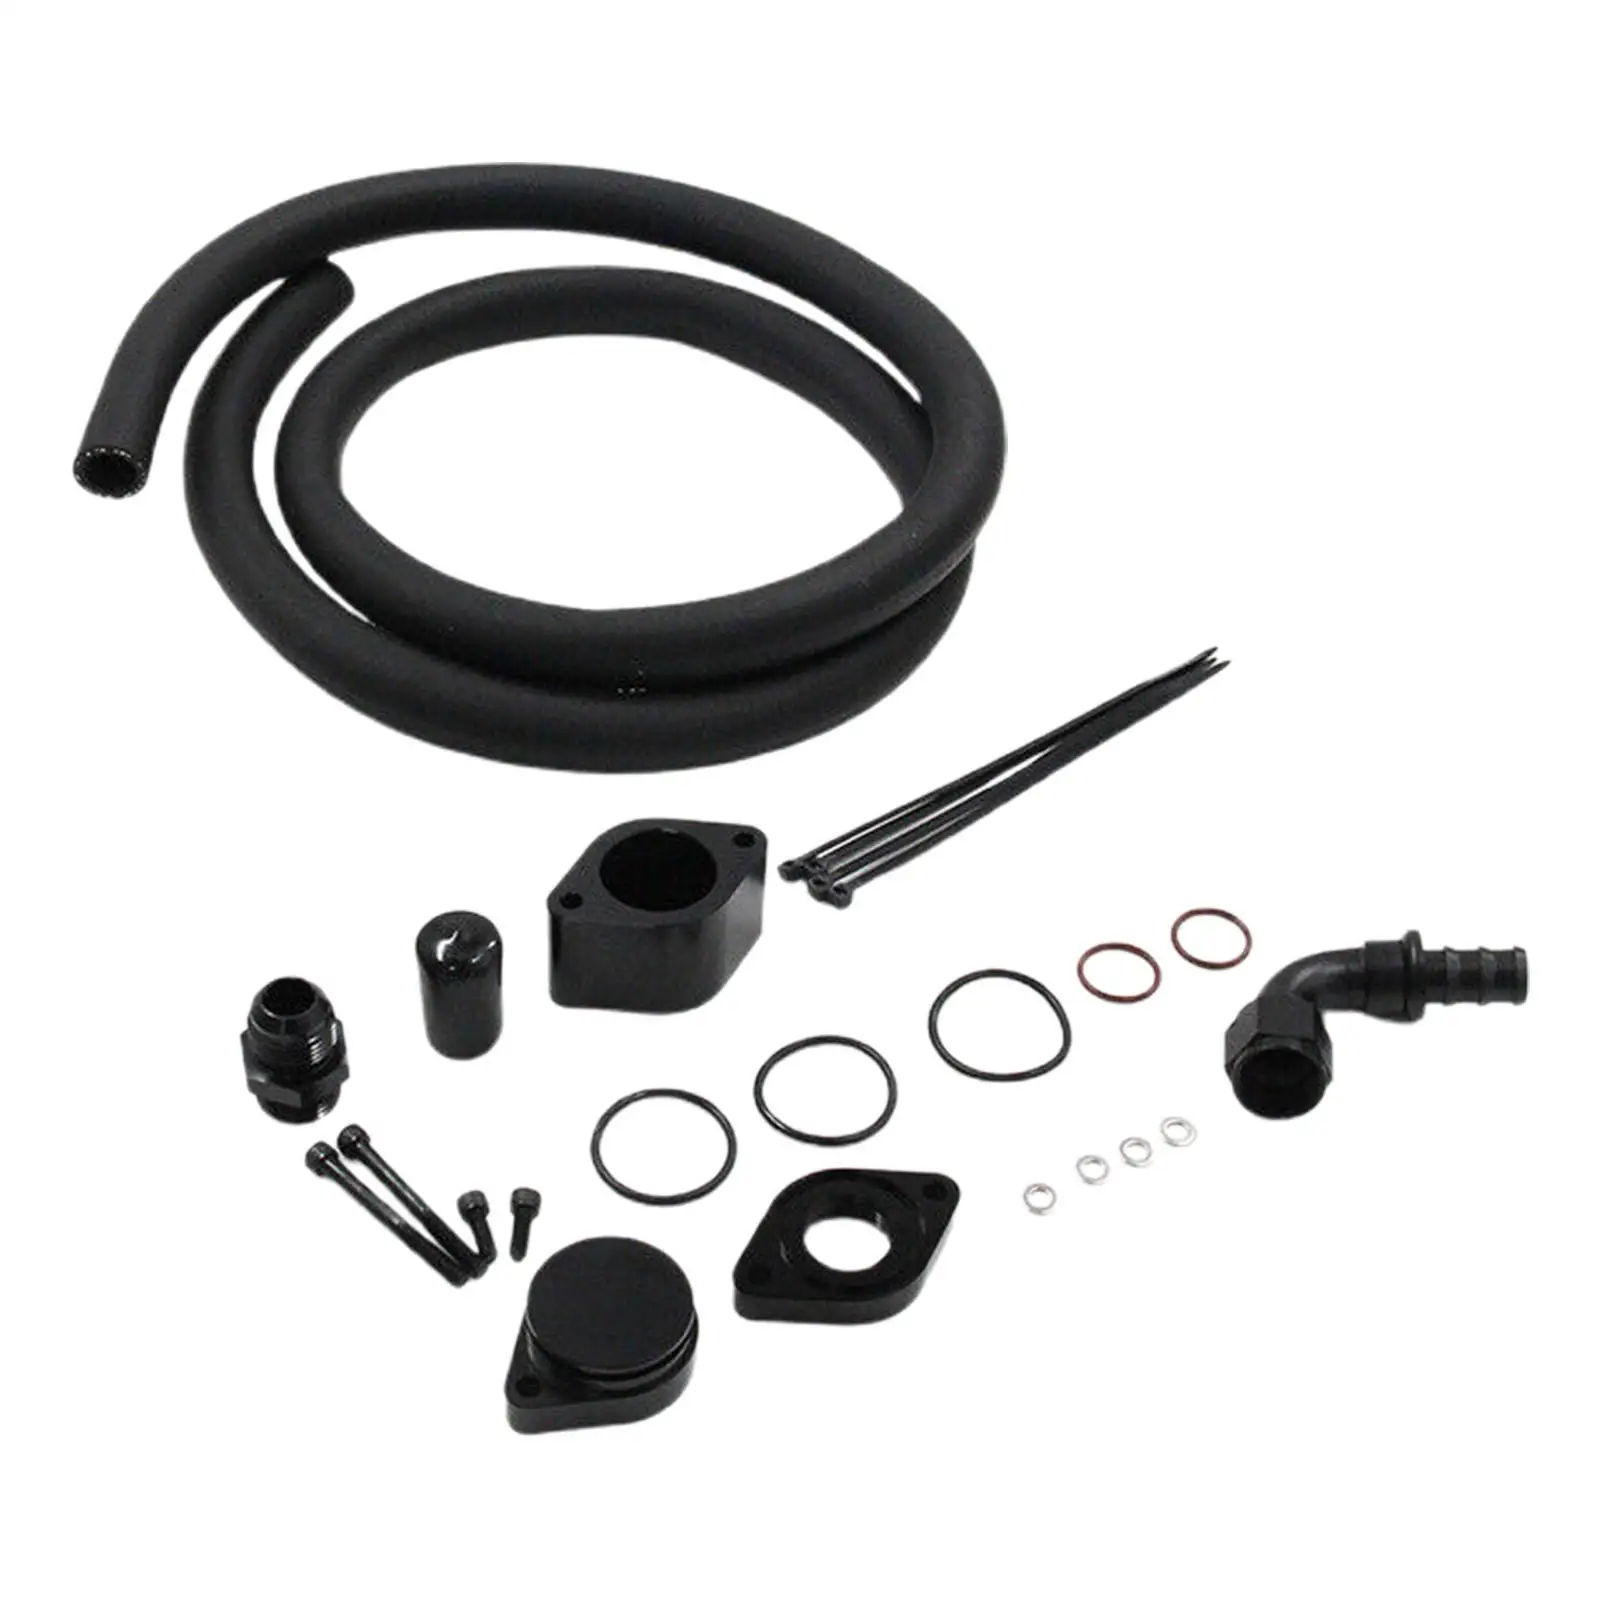 Pcv Reroute Engine Ventilation Kit for Ford Super Duty 11-20 6.7L Powerstroke